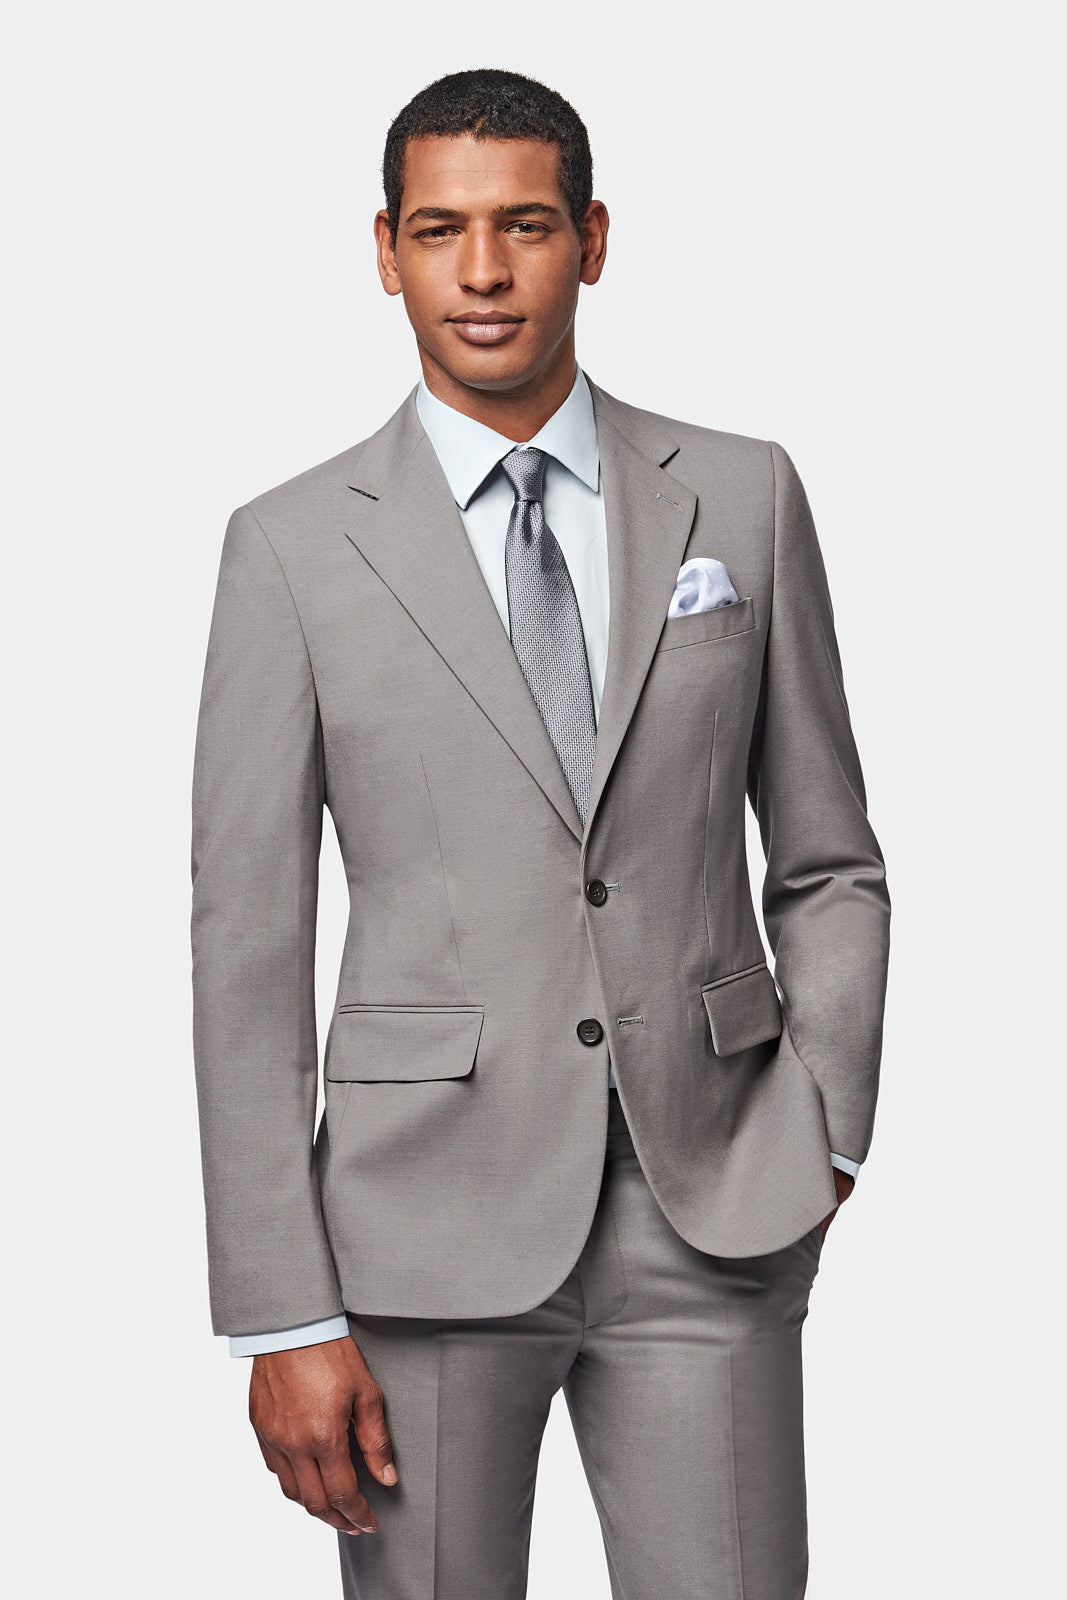 Classic Notched Lapel Suit Jacket in Charcoal Grey